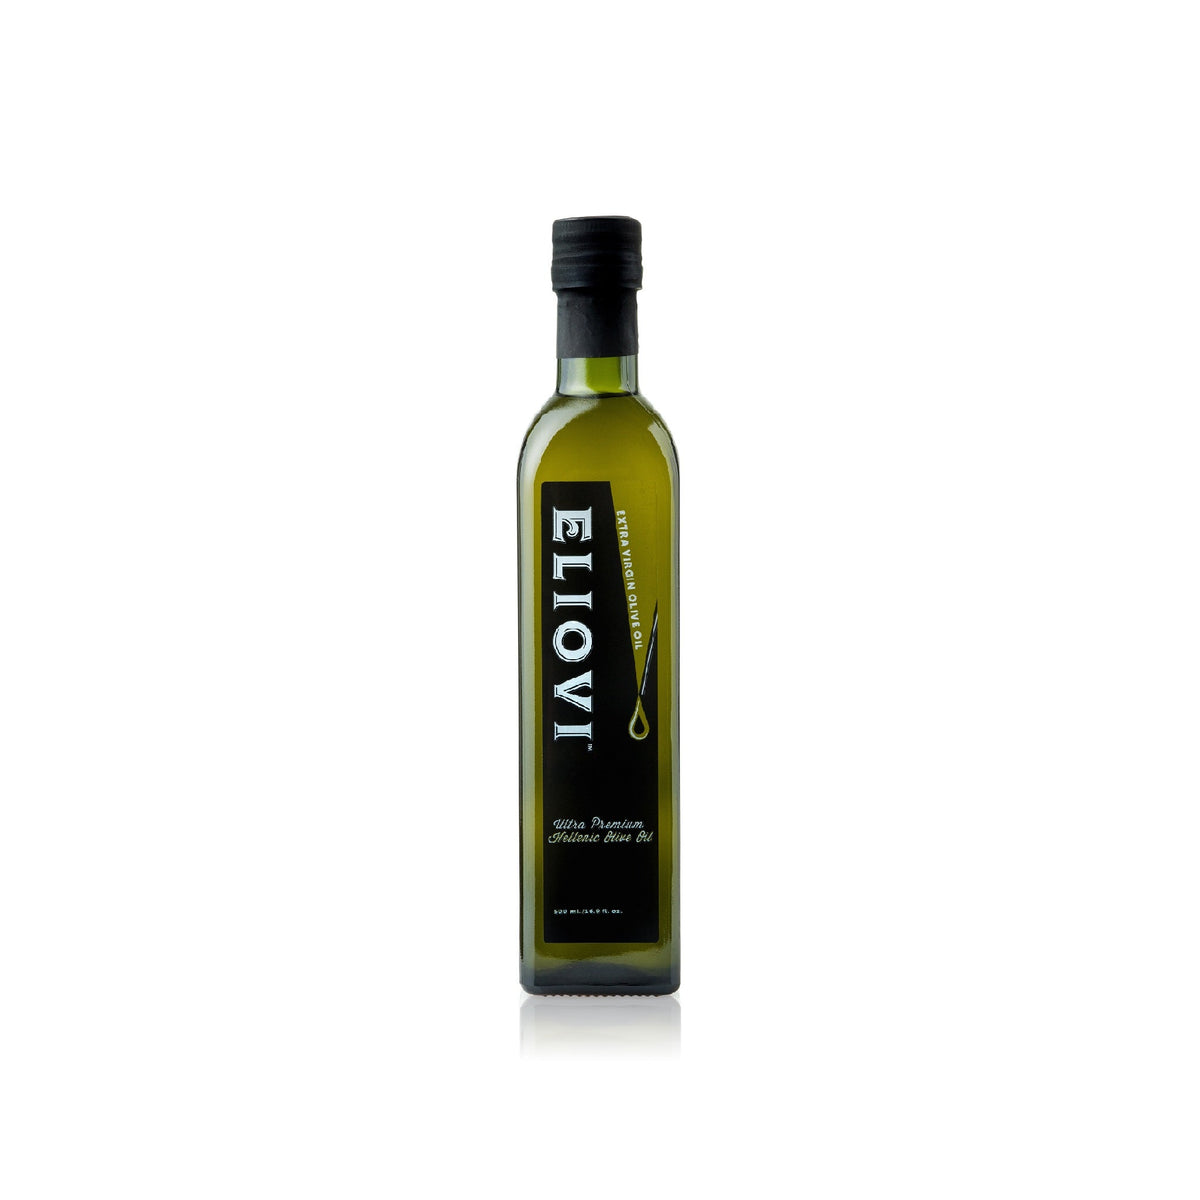 Eliovi Extra Virgin Olive Oil from Eastern Crete - Premium Quality, First Cold-Pressed Koroneiki Olives 16.9 Fl. Oz by Alpha Omega Imports